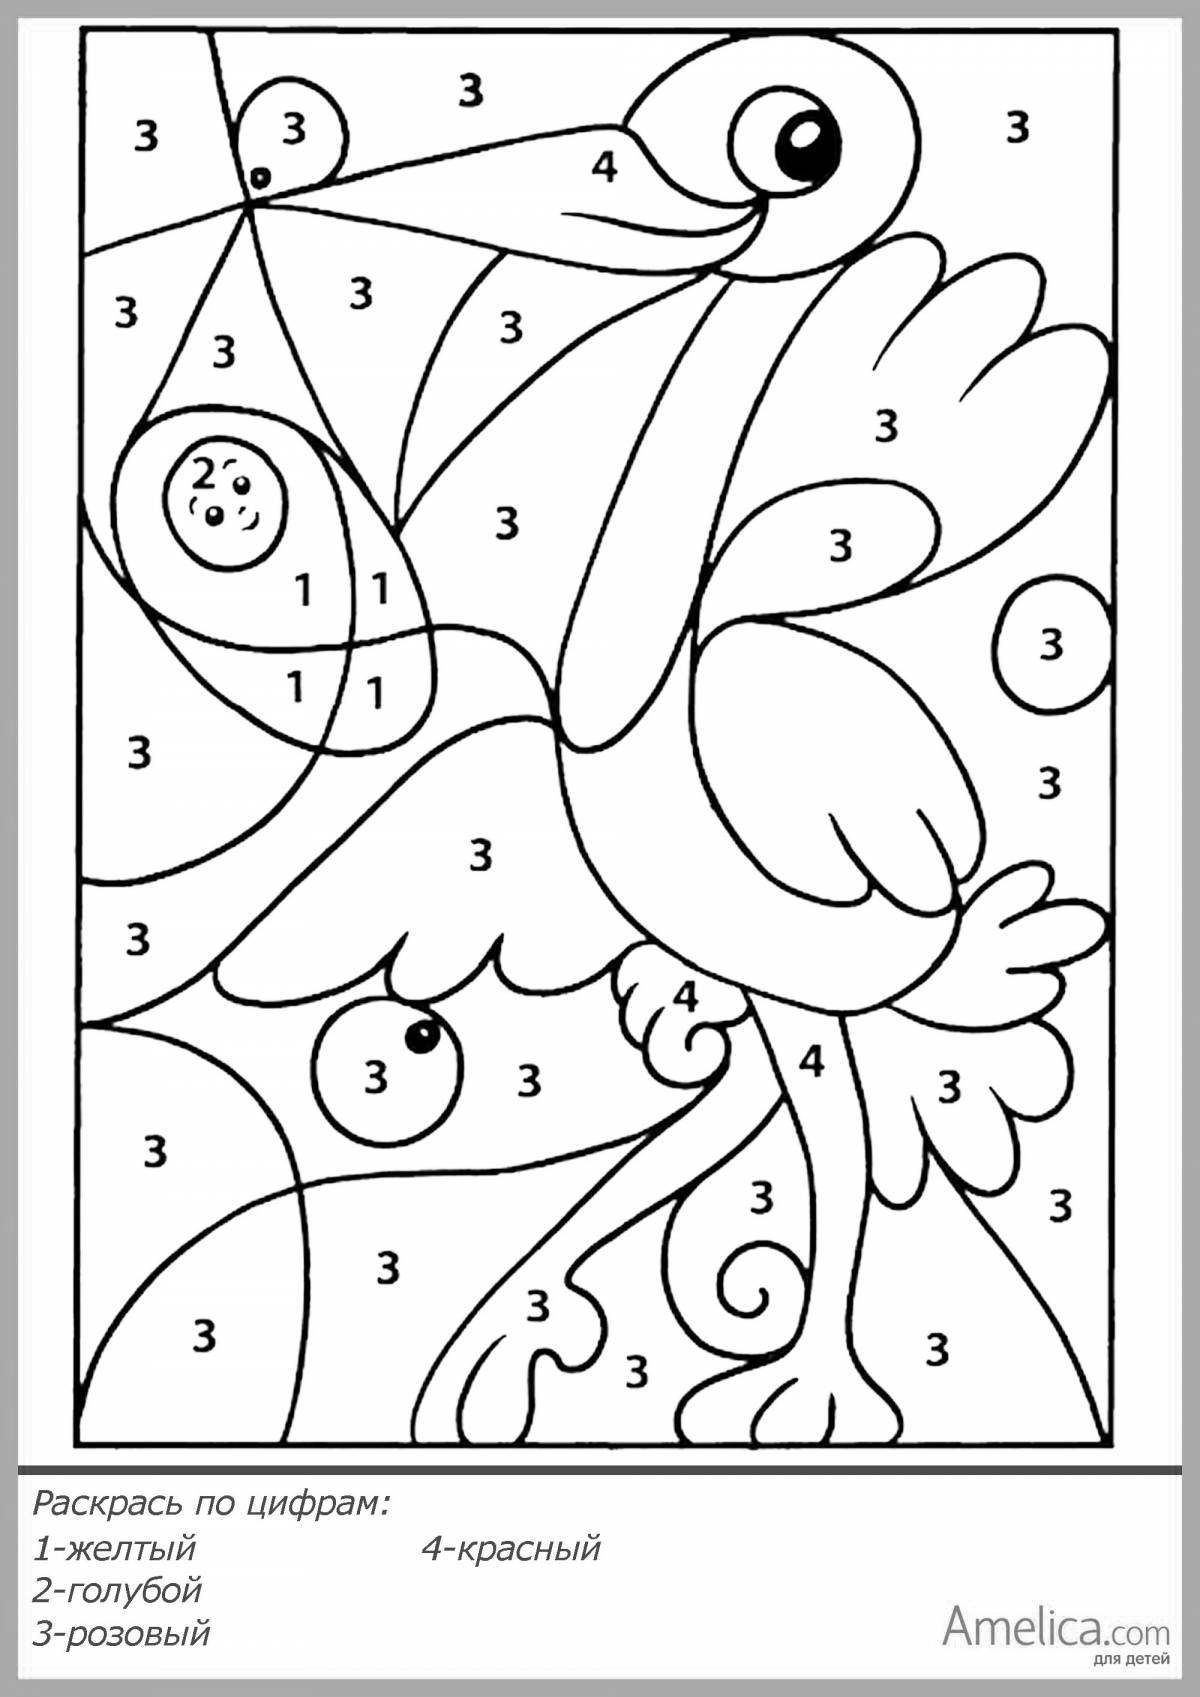 Color-luscious coloring page digital for children 7 years old